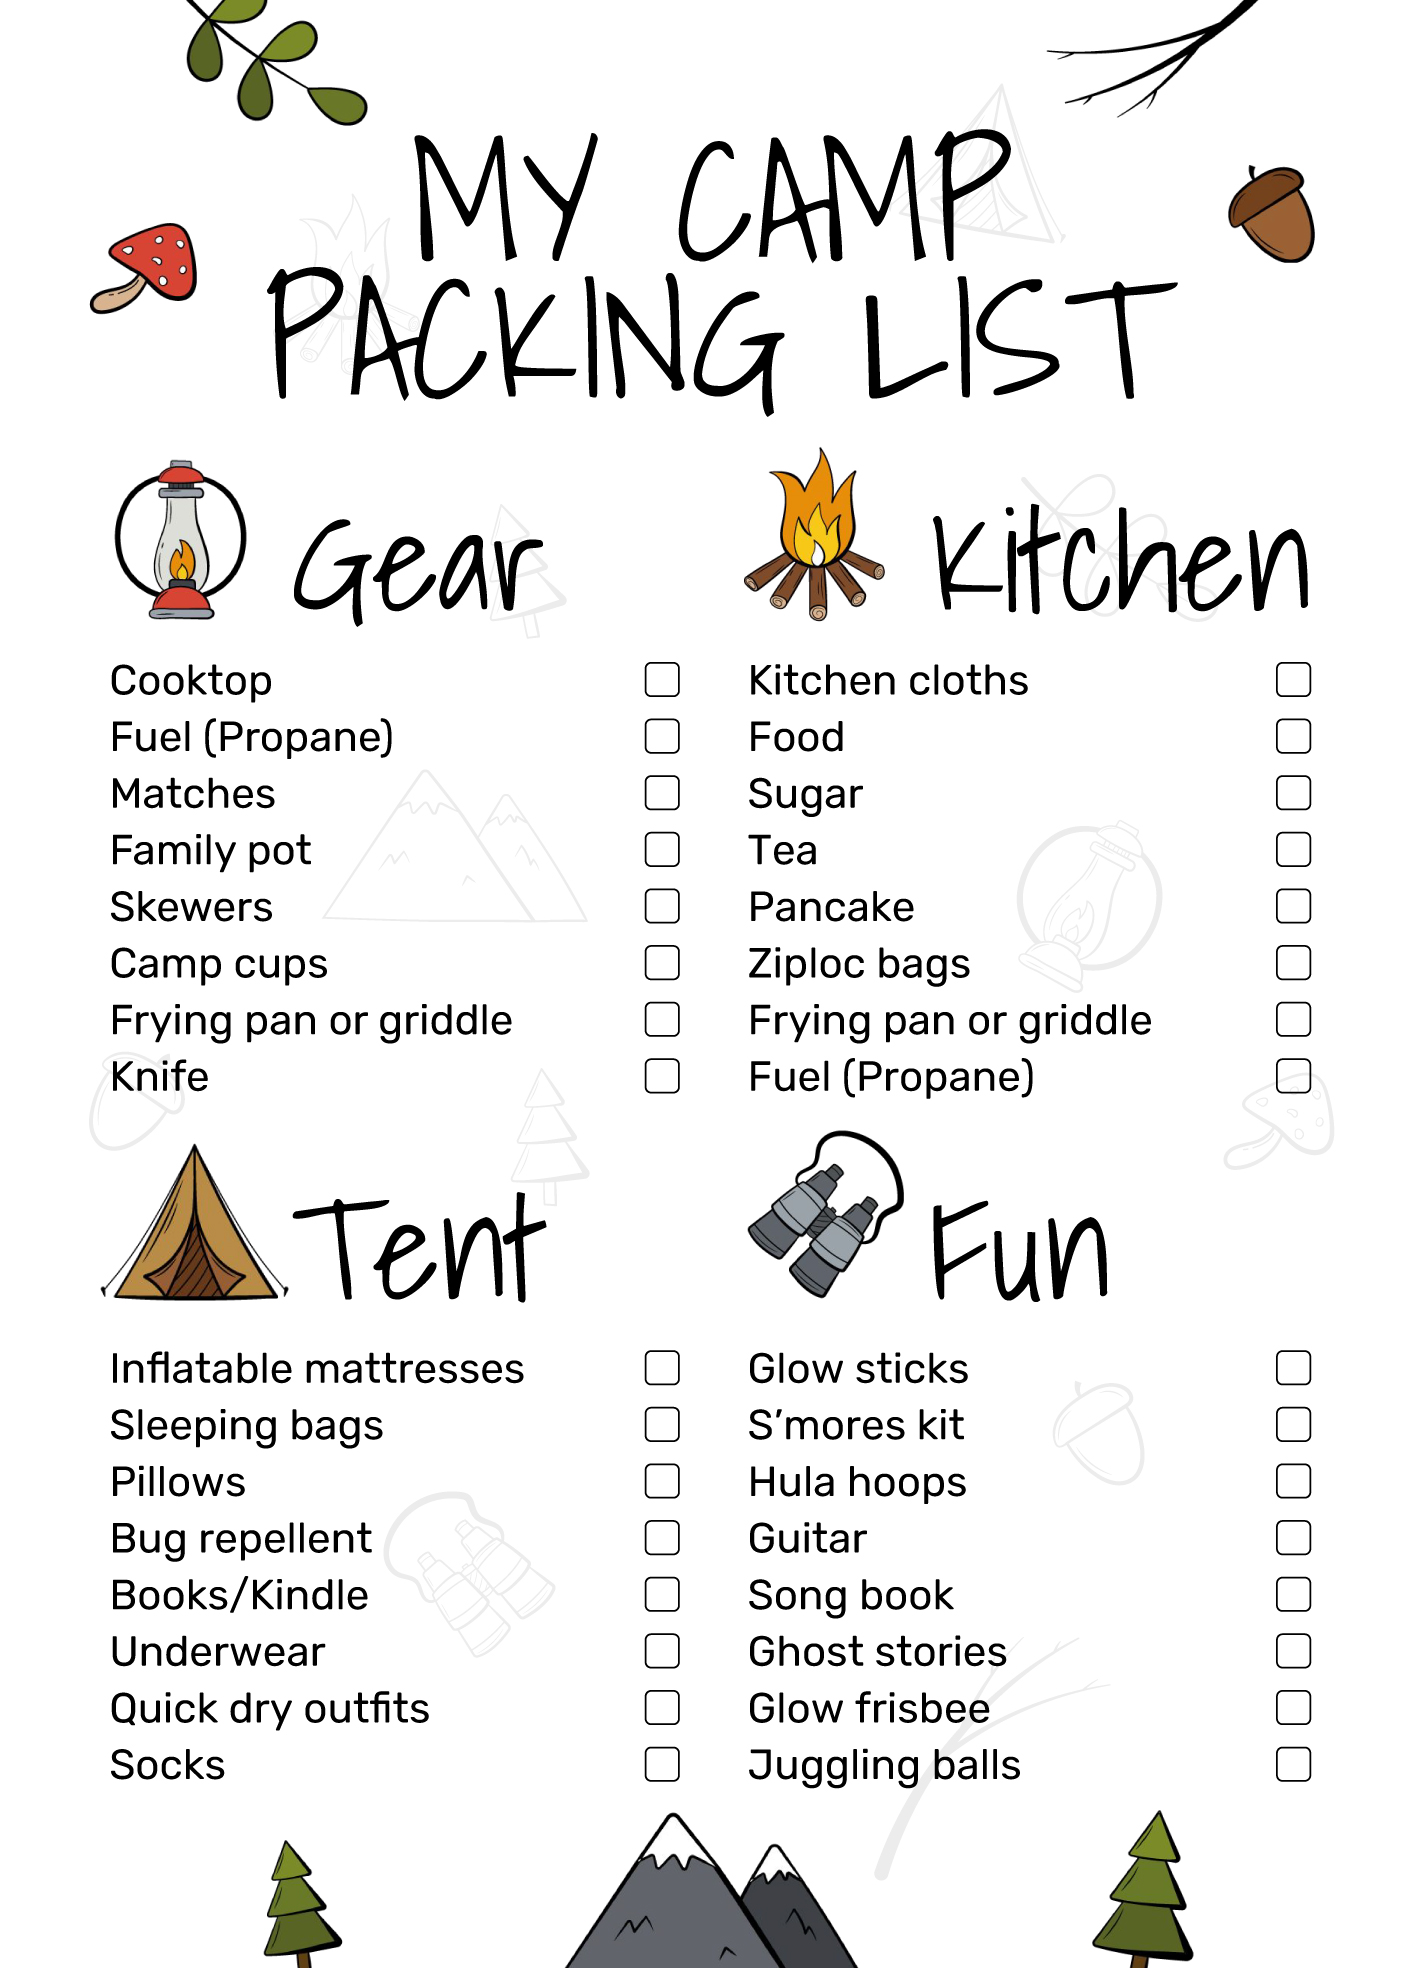 What to Bring Camping: Download our Free Camping Essentials Checklist